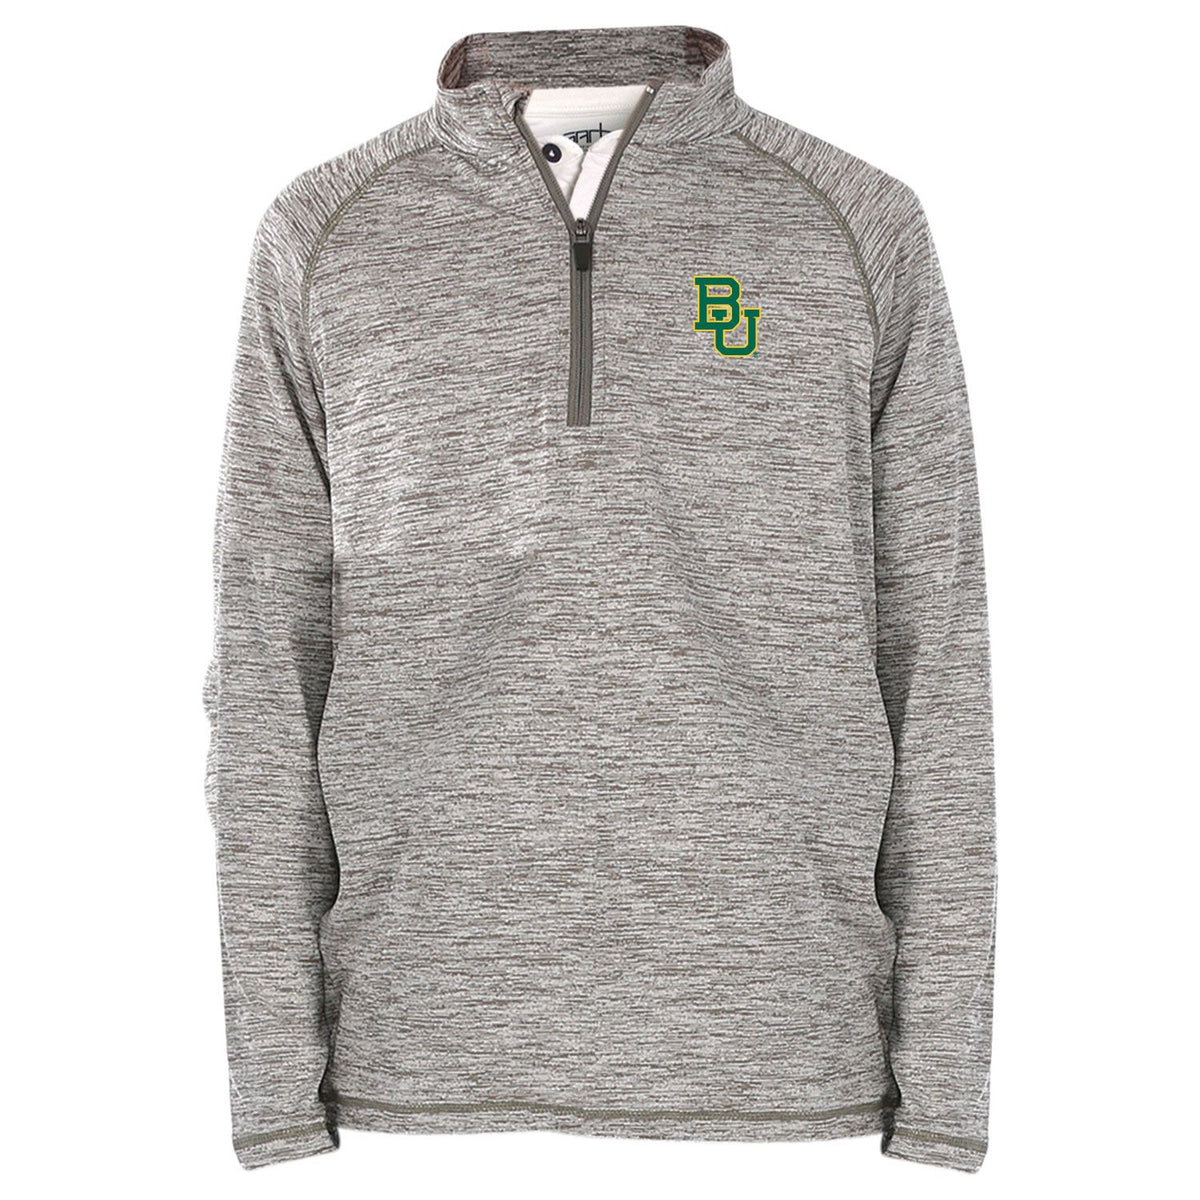 Baylor Bears Youth Boys' 1/4-Zip Pullover